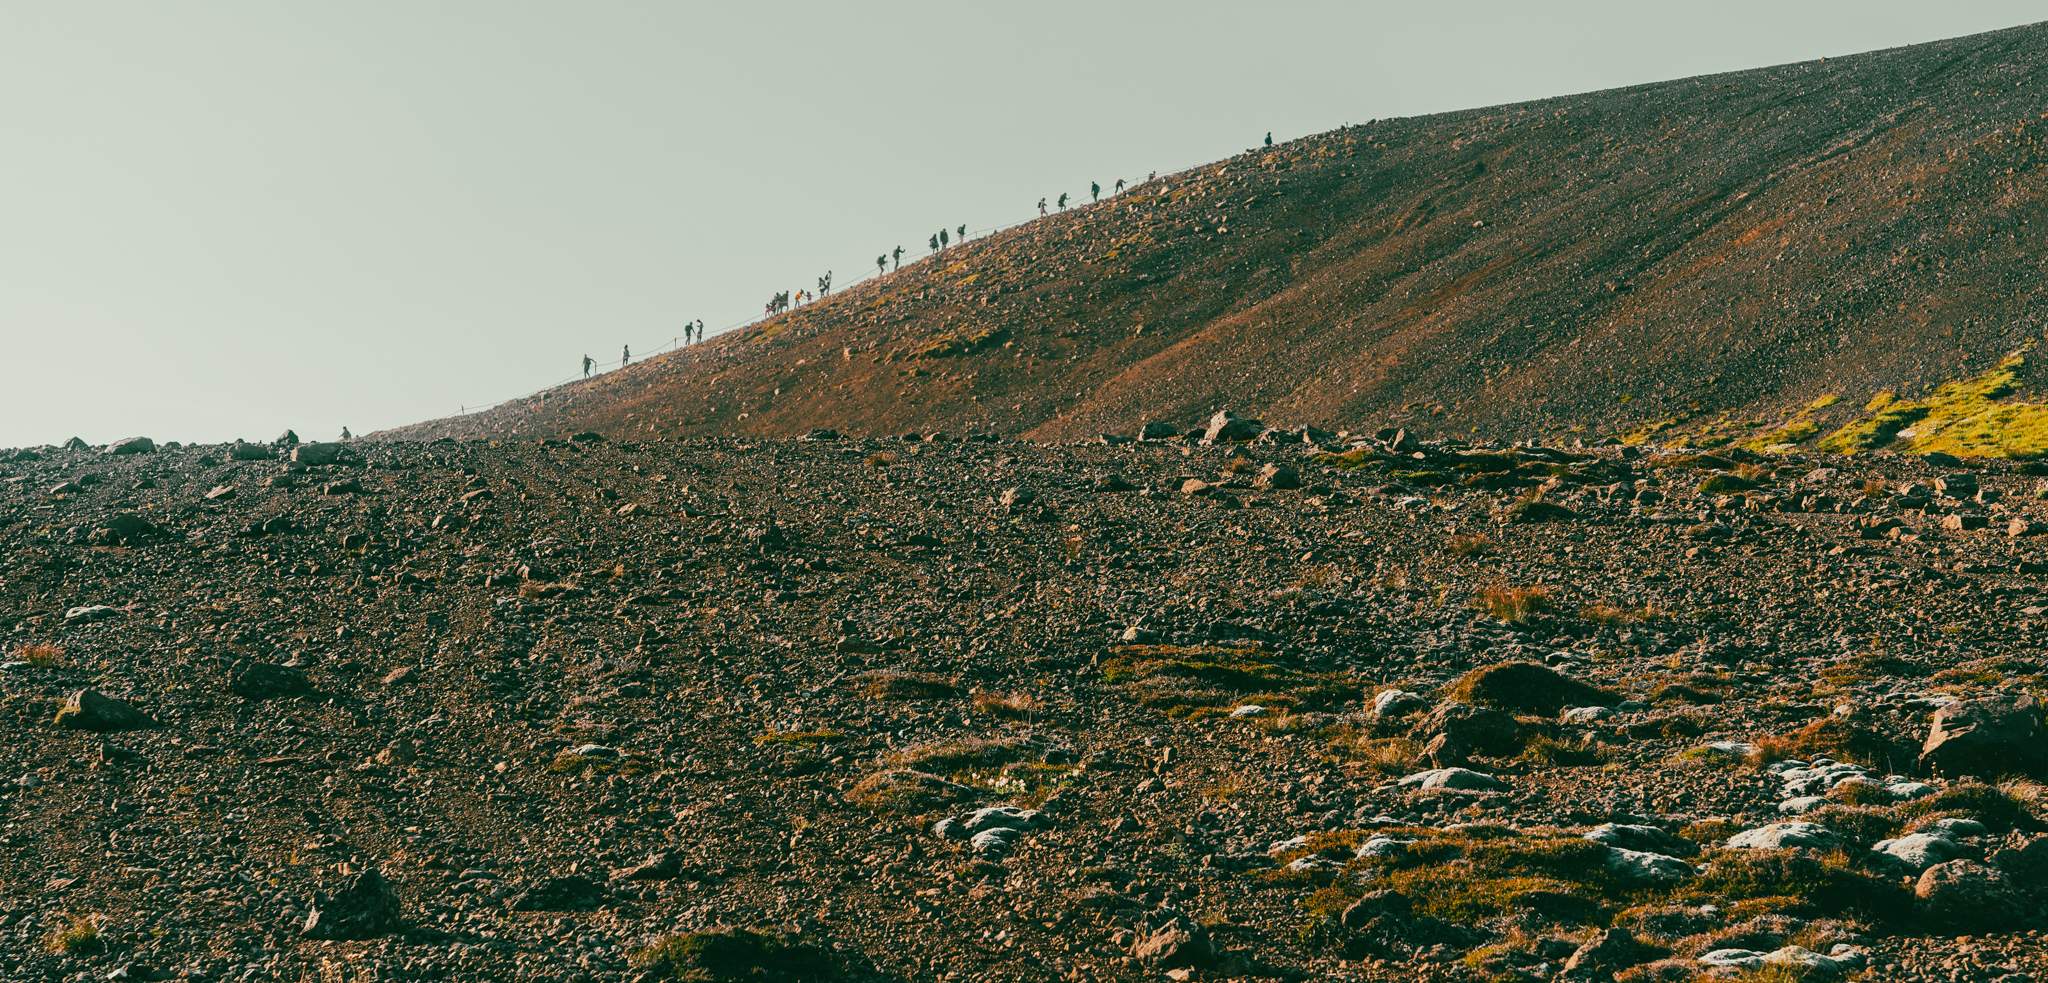 Visitors on the ridge of the hill leading above the valley